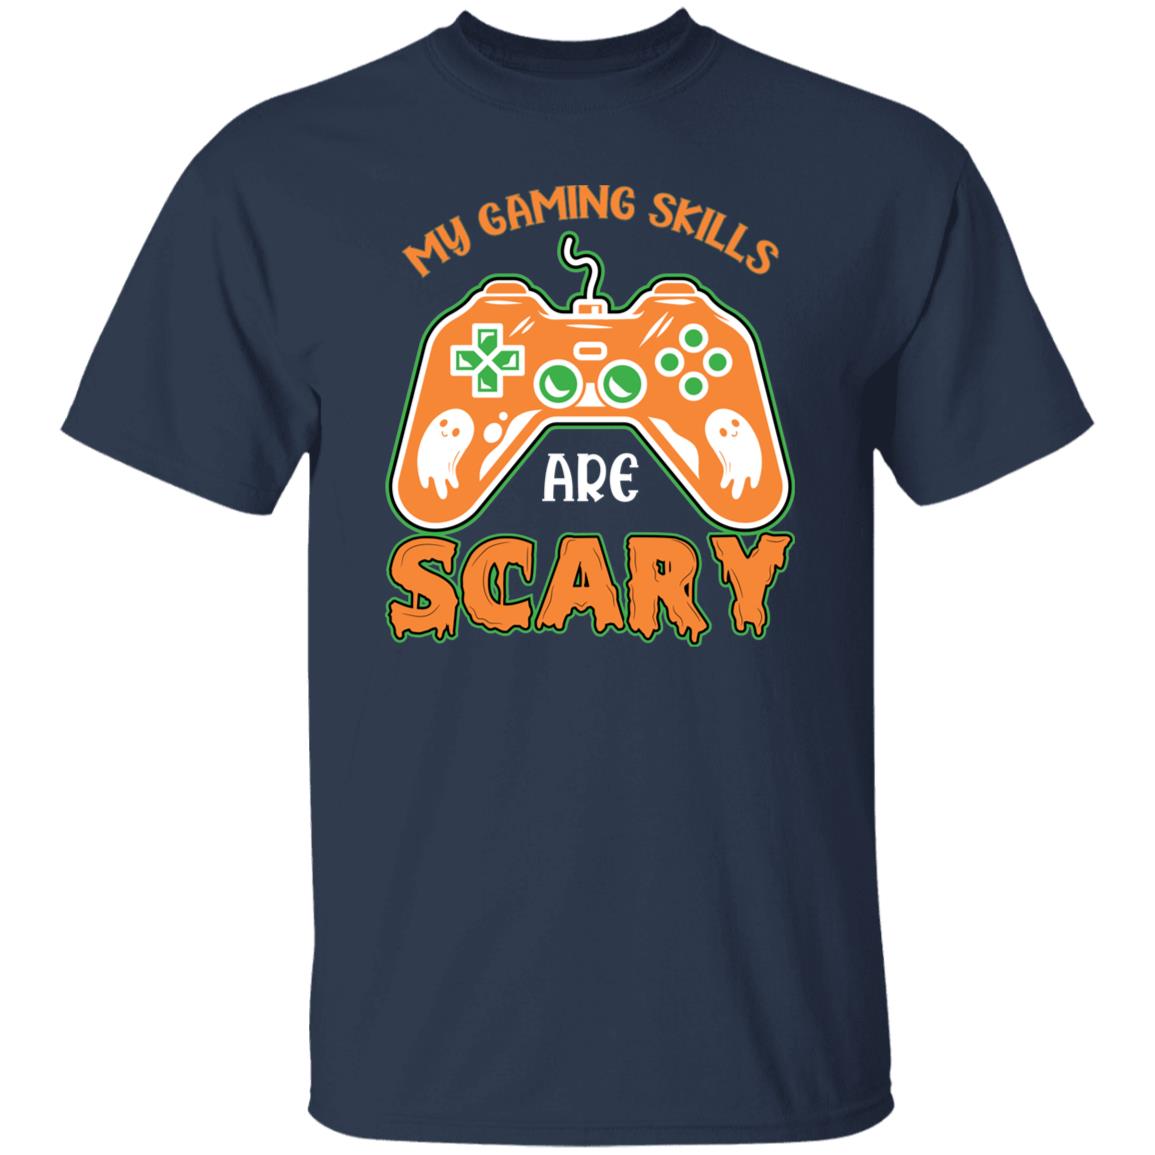 My Gaming Skills Are Scary Funny Halloween Gift For Gamers